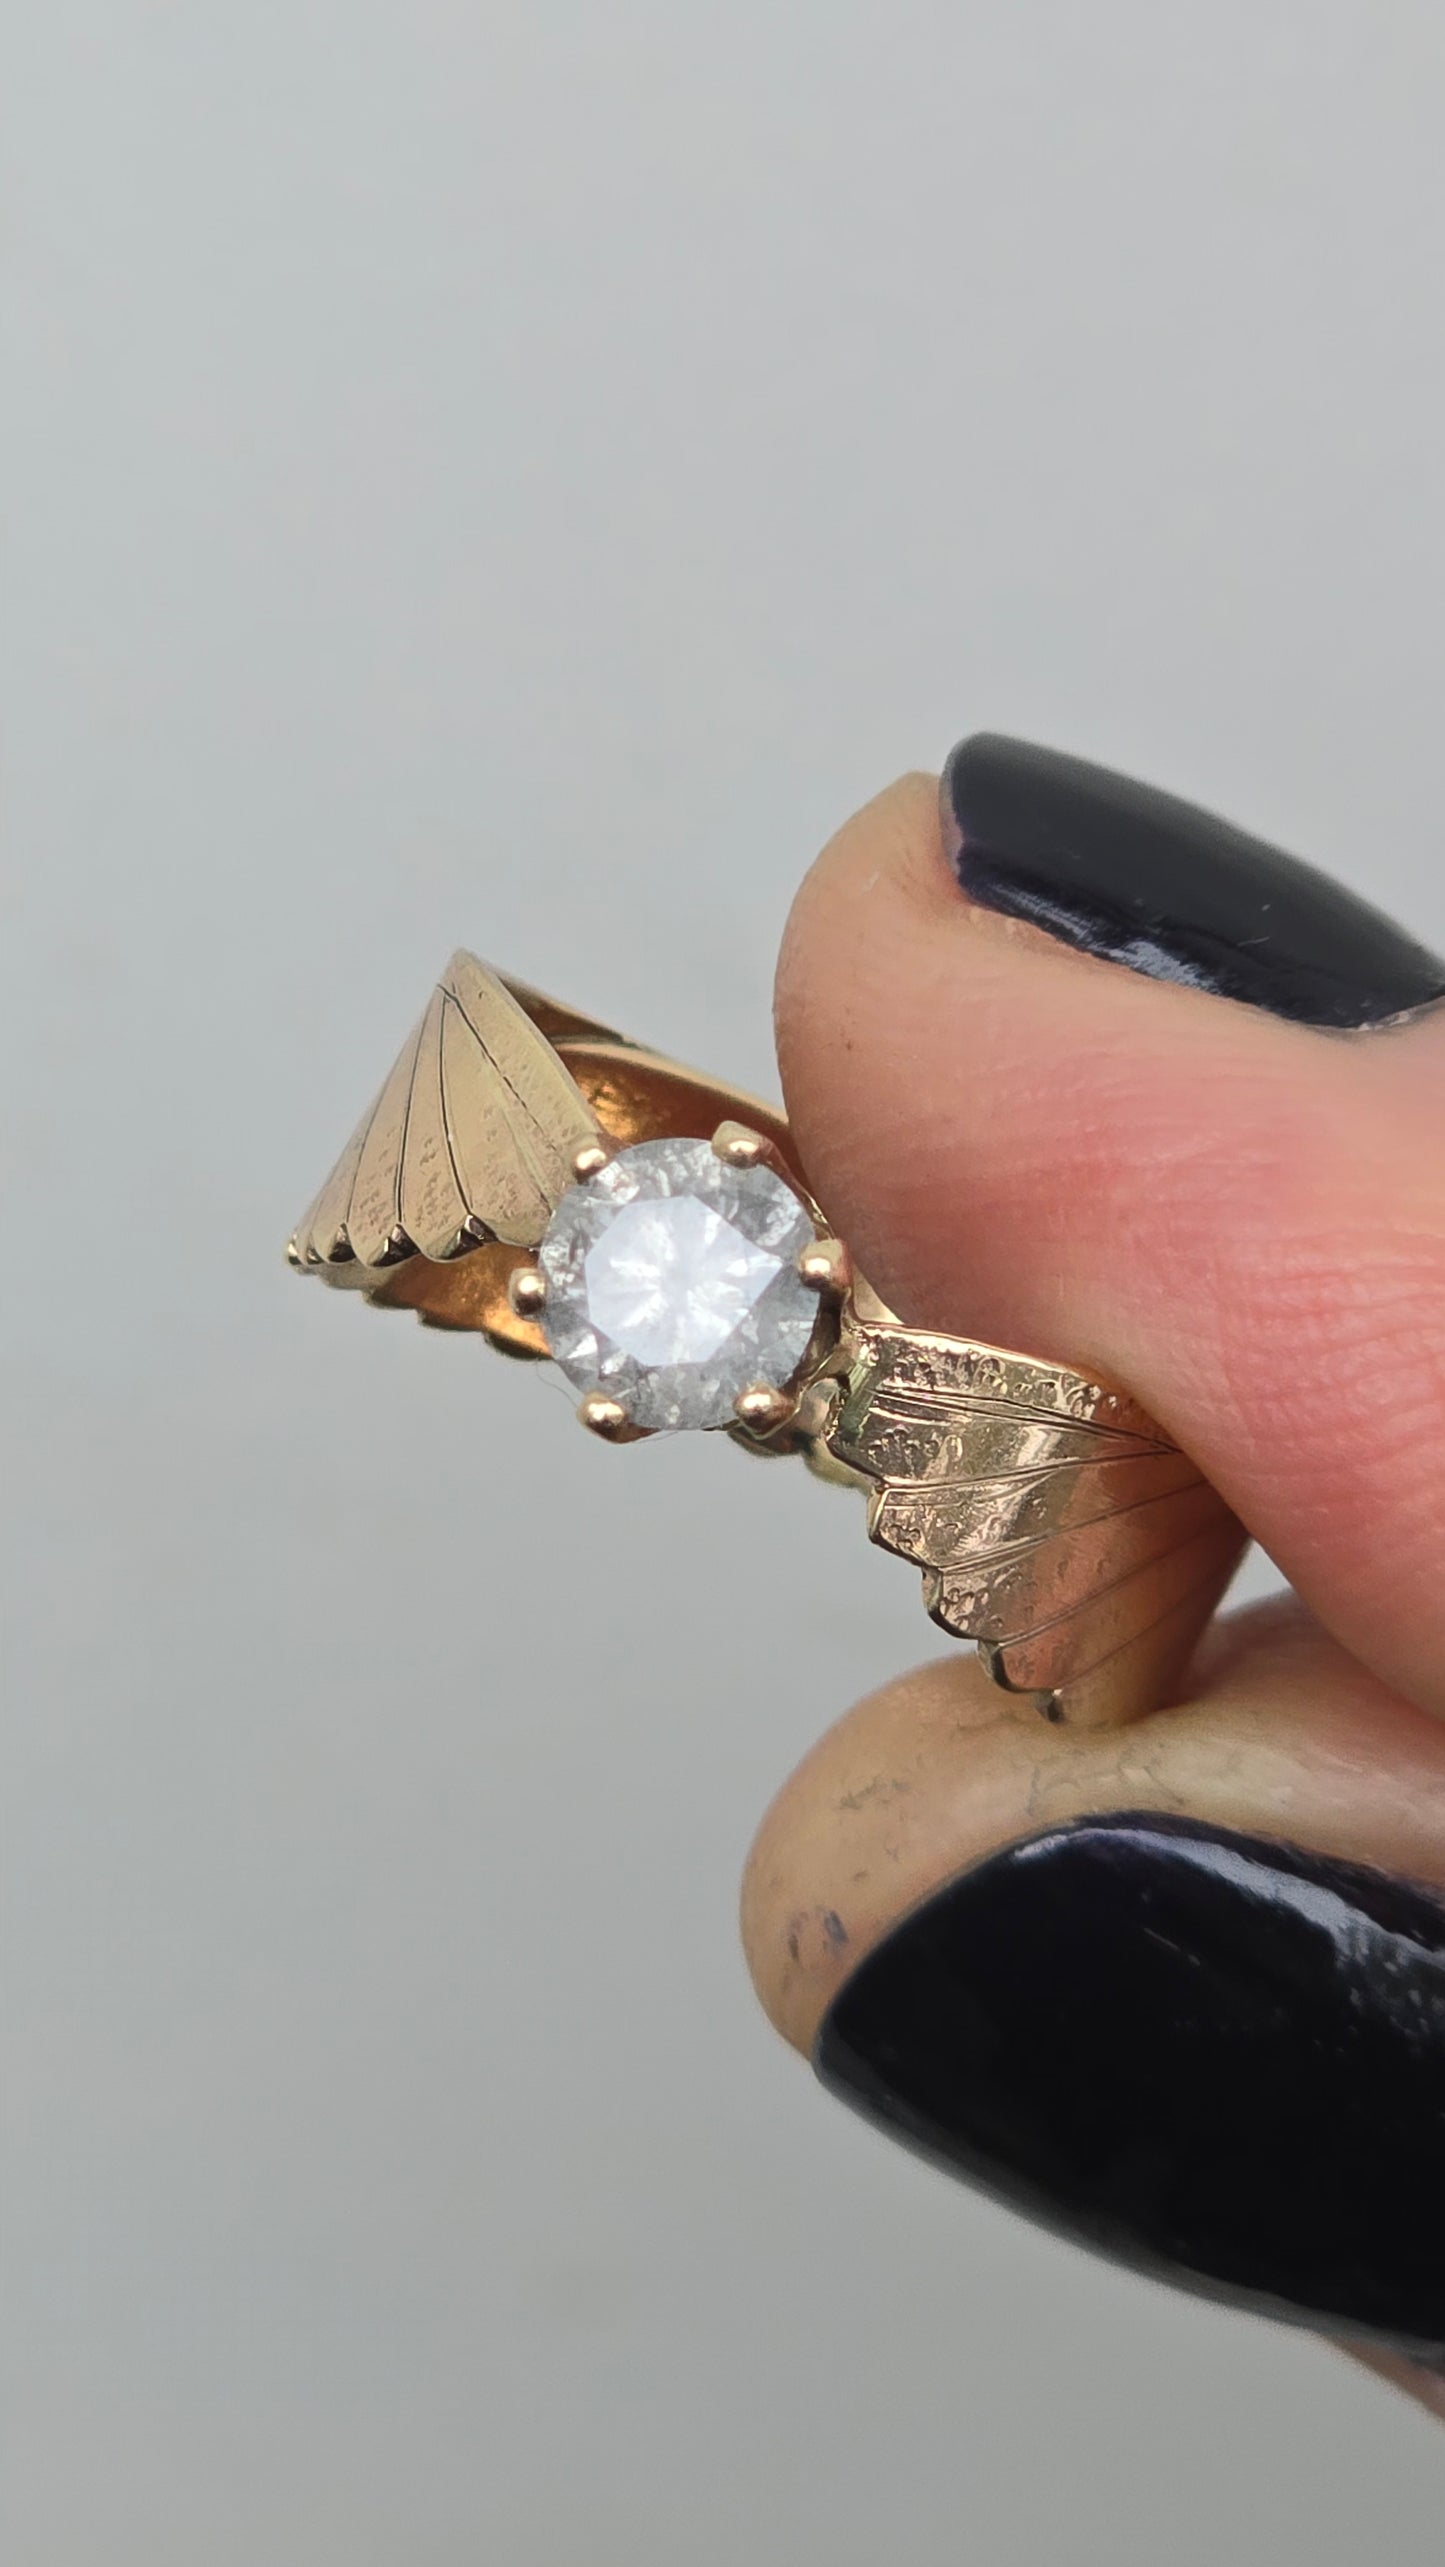 x To Live Is To Fly: WINGED Ring - (size 8/8.25) .70 Carat Salt & Pepper Diamond in Solid 14K Gold